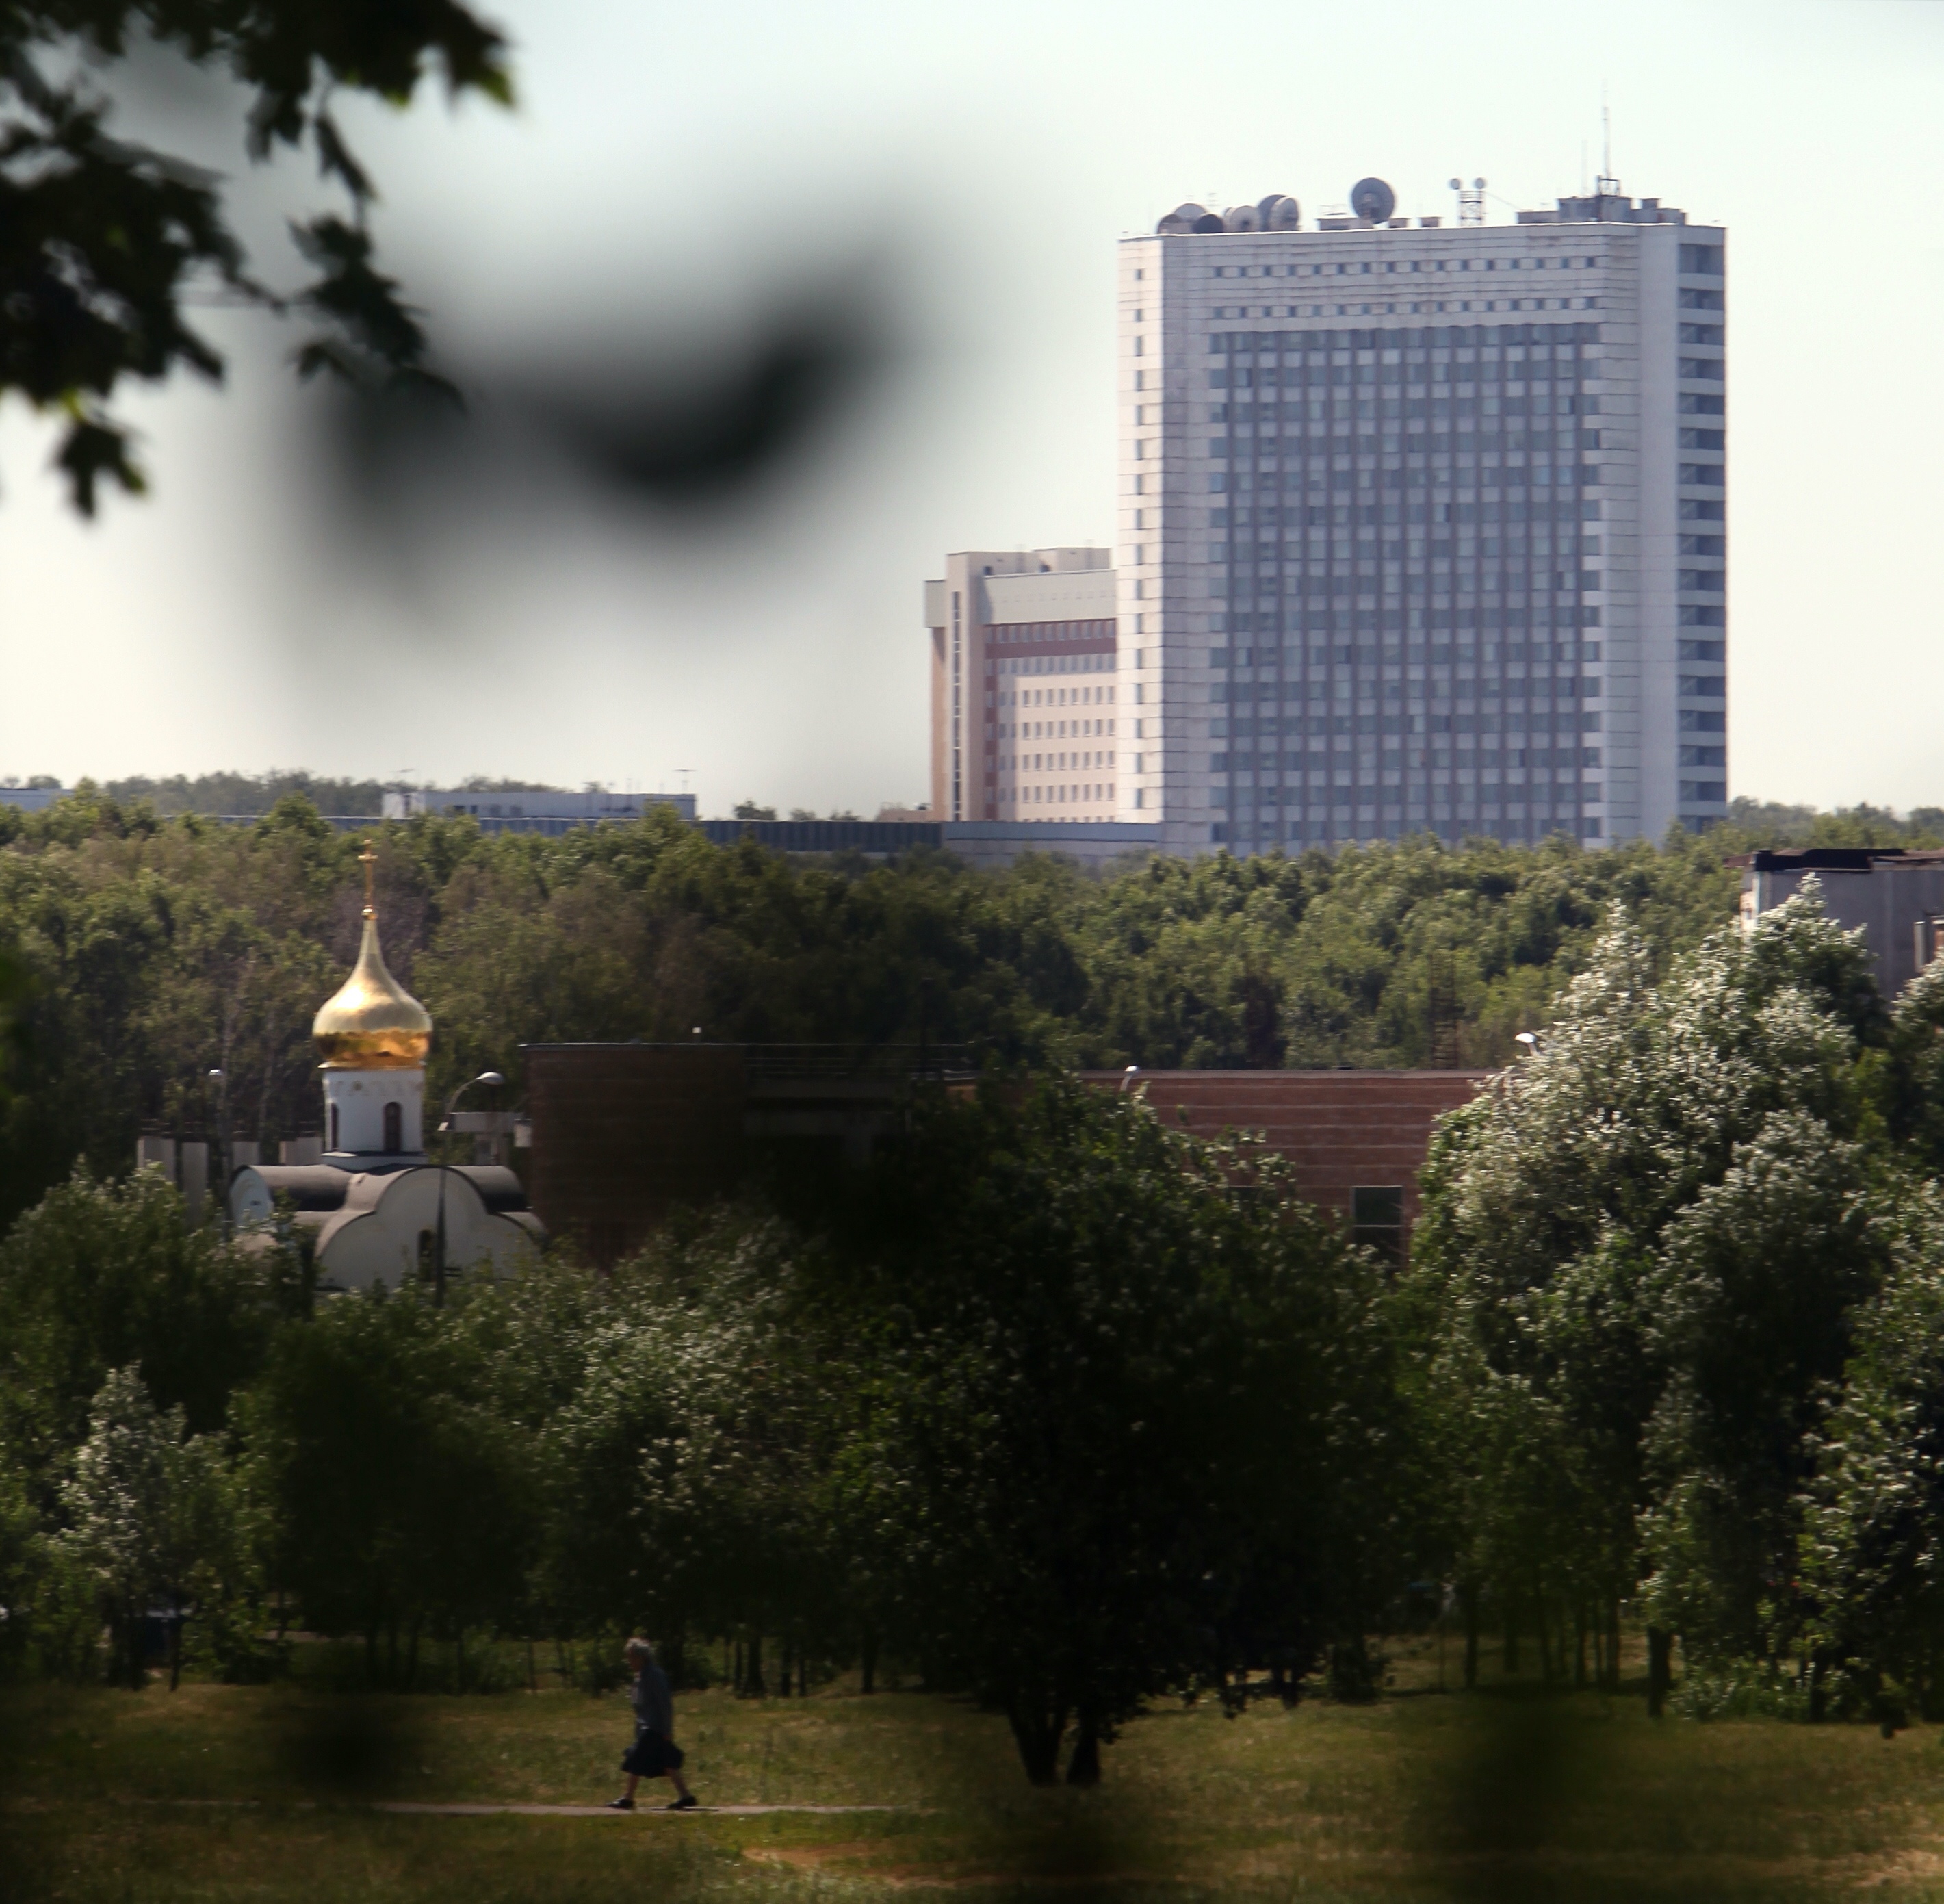 A distant view of Russia's foreign intelligence service compound.